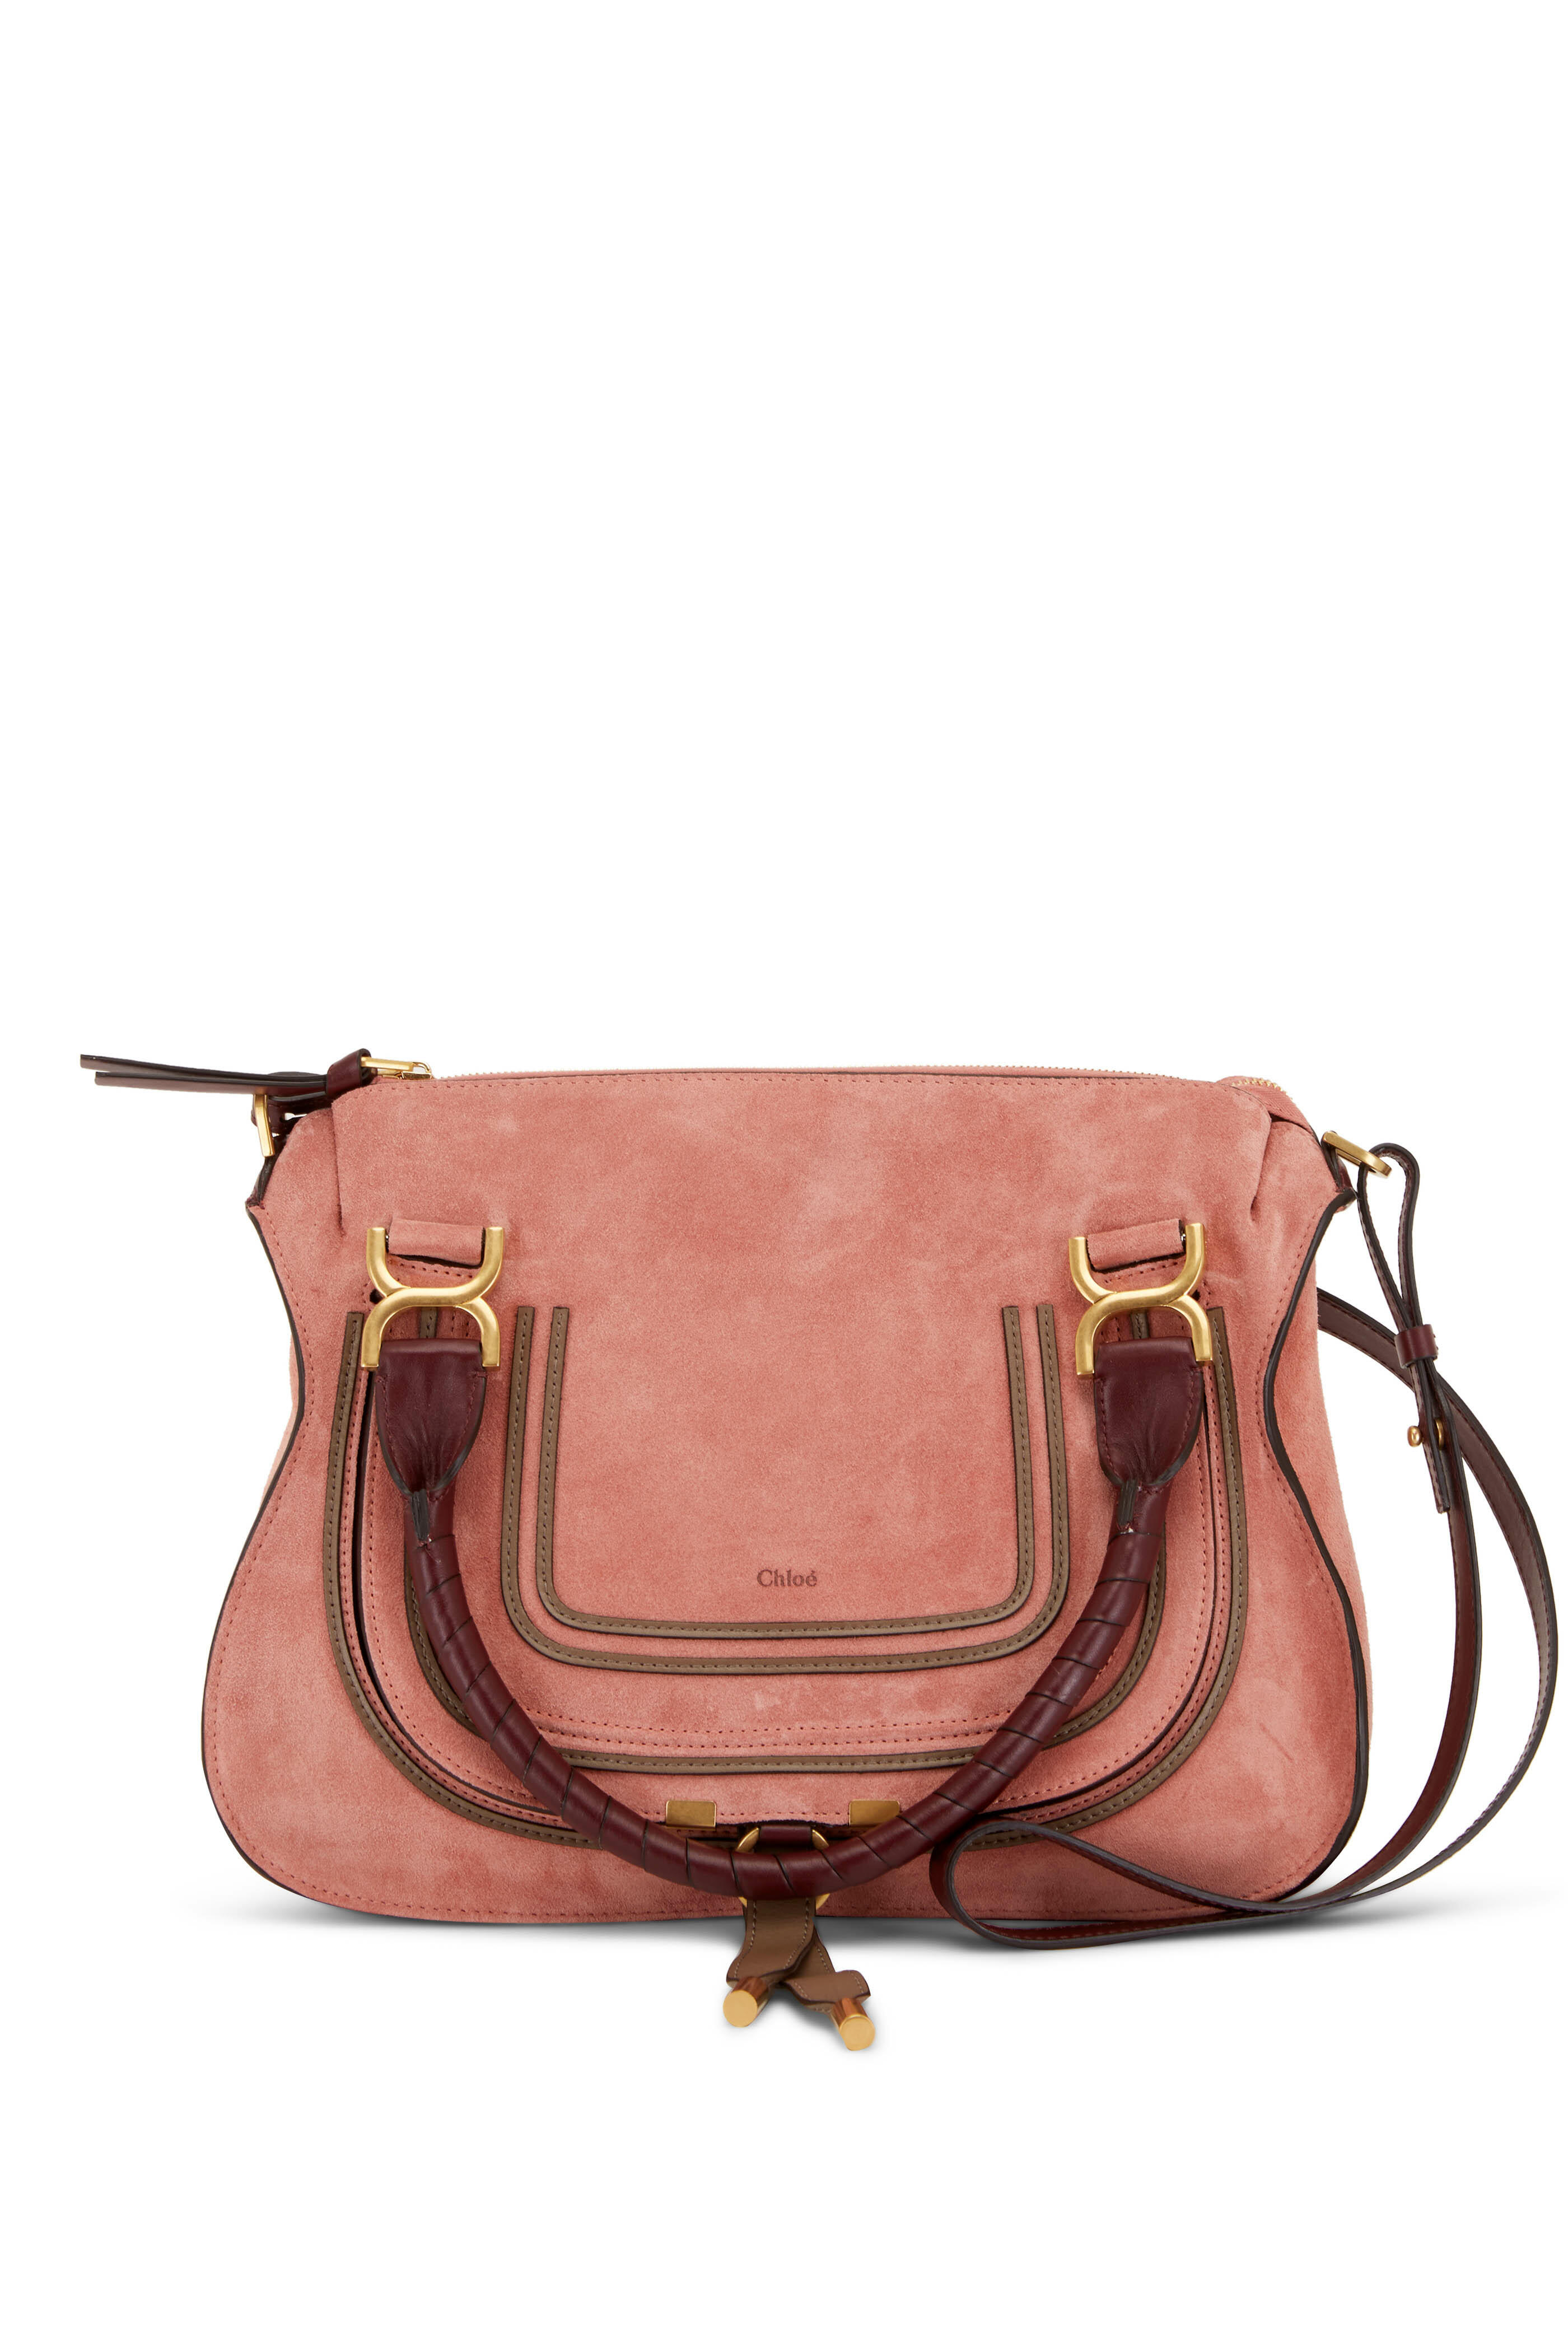 Prada Women's Pink Alabstro Galleria Crystal Small Satchel Bag | by Mitchell Stores